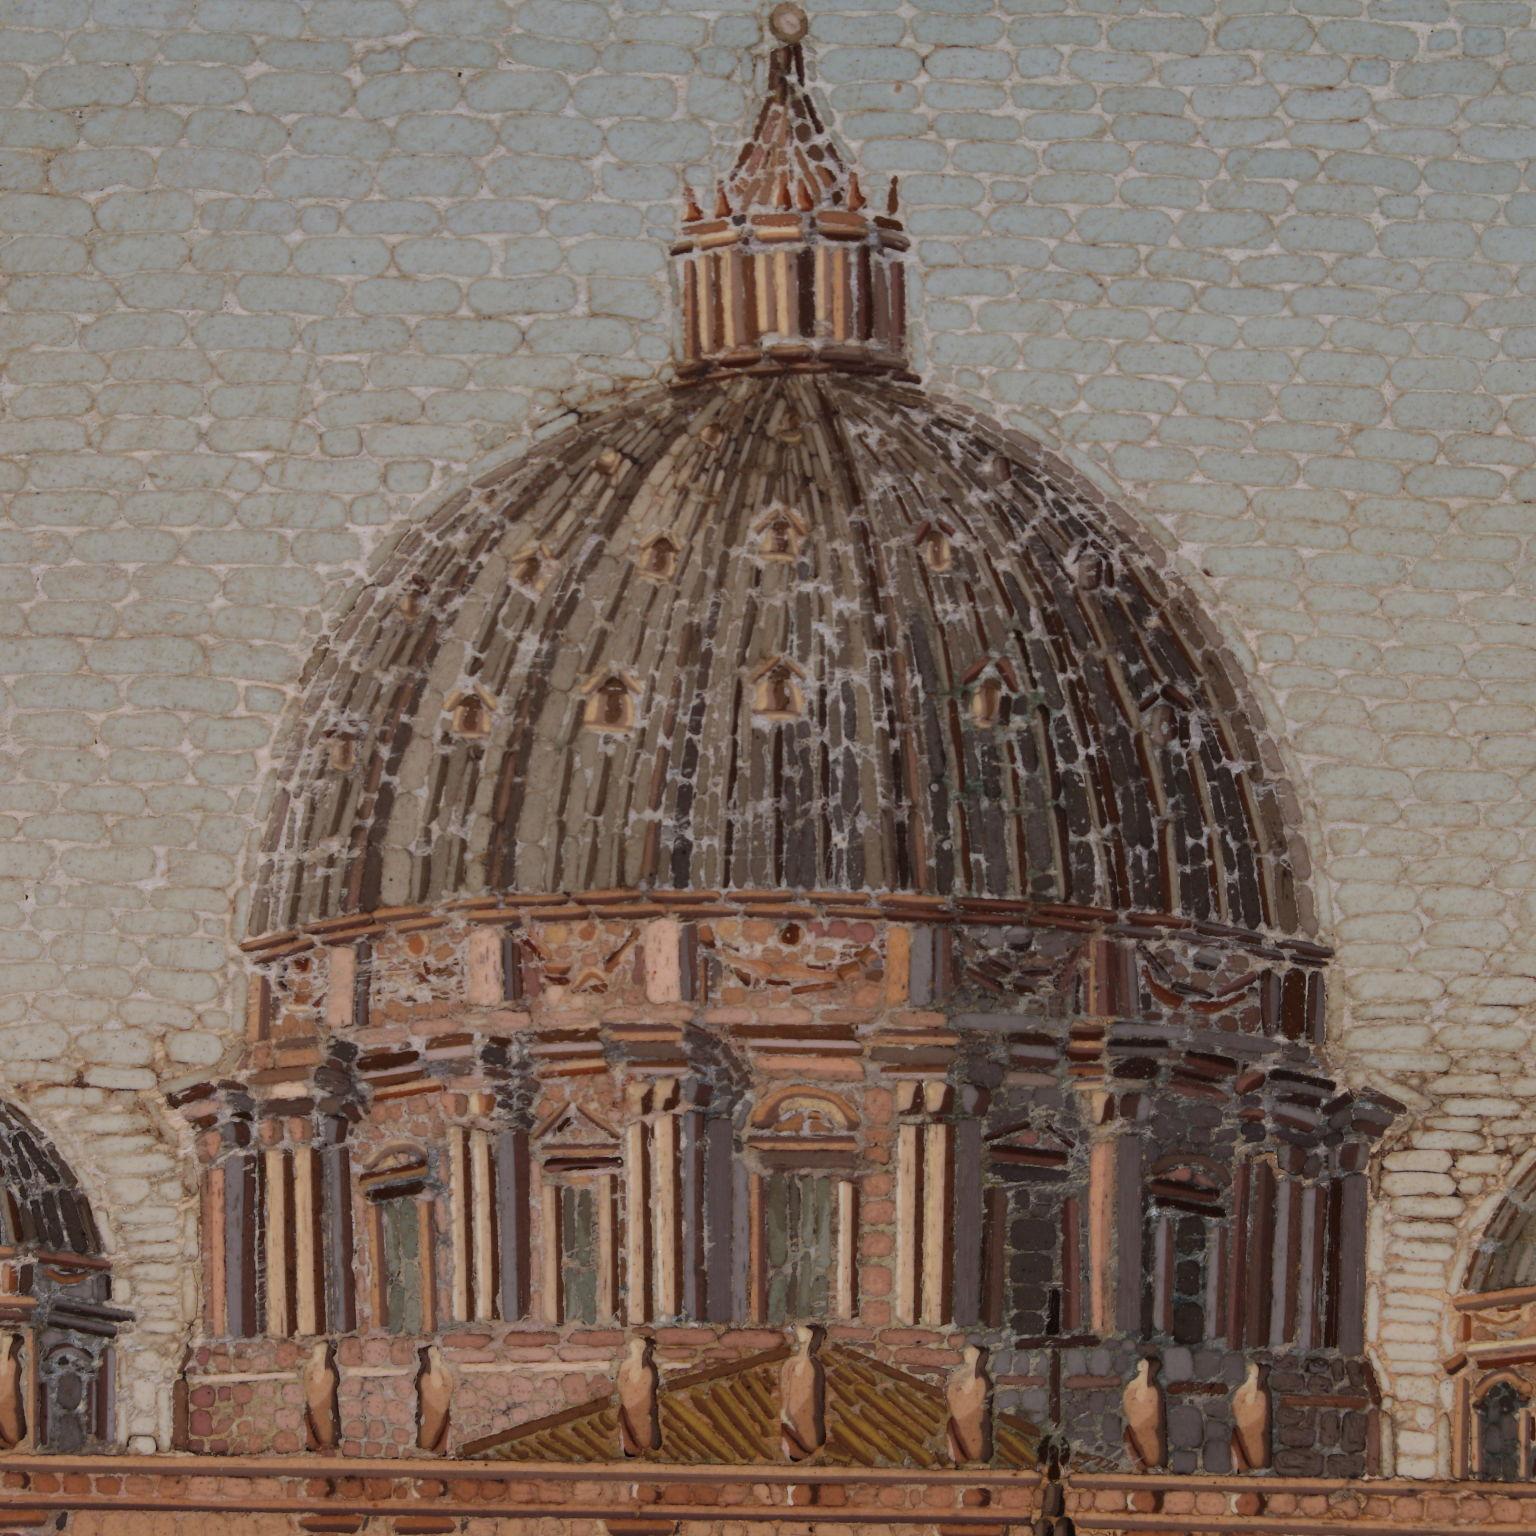 Work of the reverend Factory of San Pietro, factory of pieces that would become papal gifts, last quarter of 19th century.
Rectangular painting made as tiny mosaic in a iron box representing the Basilica di San Pietro ( Saint Peter’s Chatedral) and